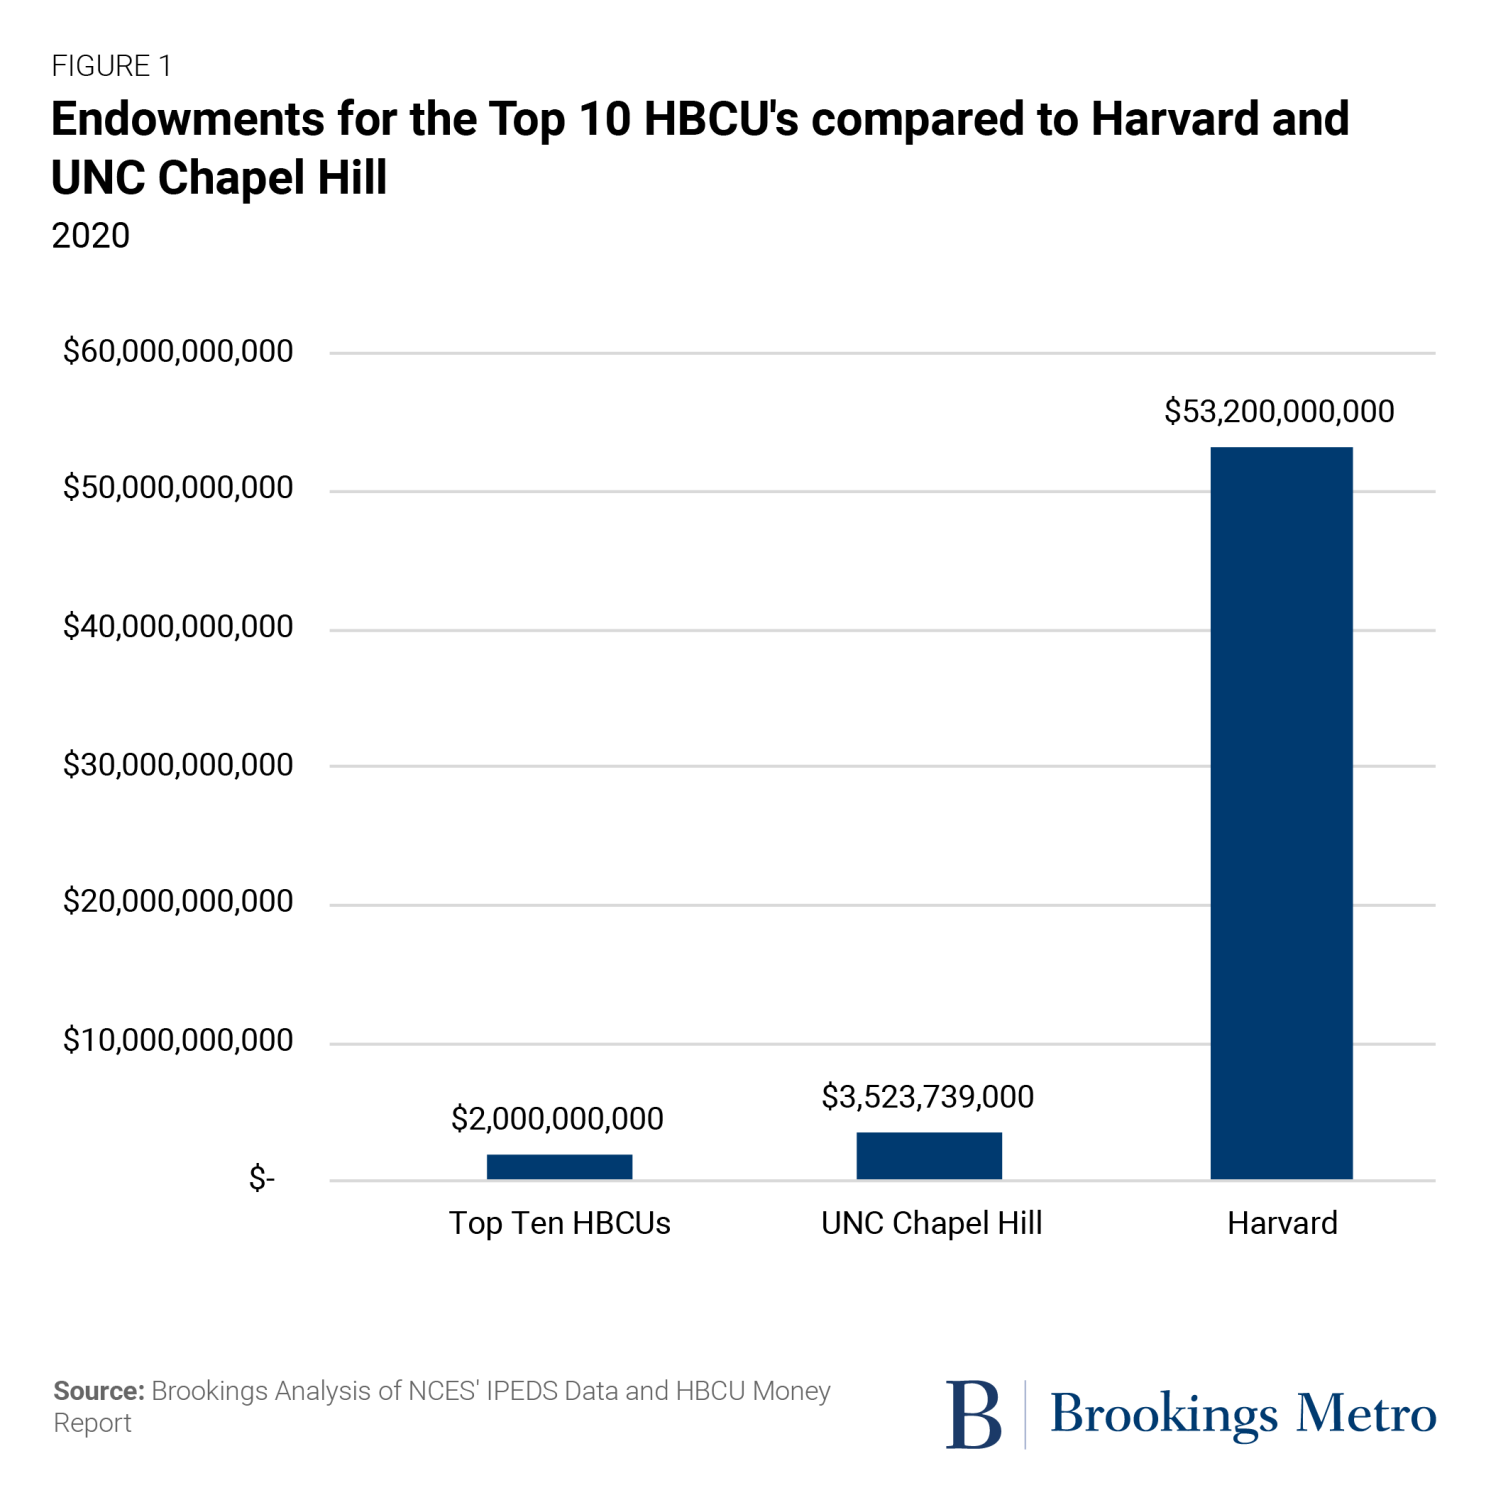 Figure 1: Endowments for the Top 10 HBCU's compared to Harvard and UNC Chapel Hill, 2020